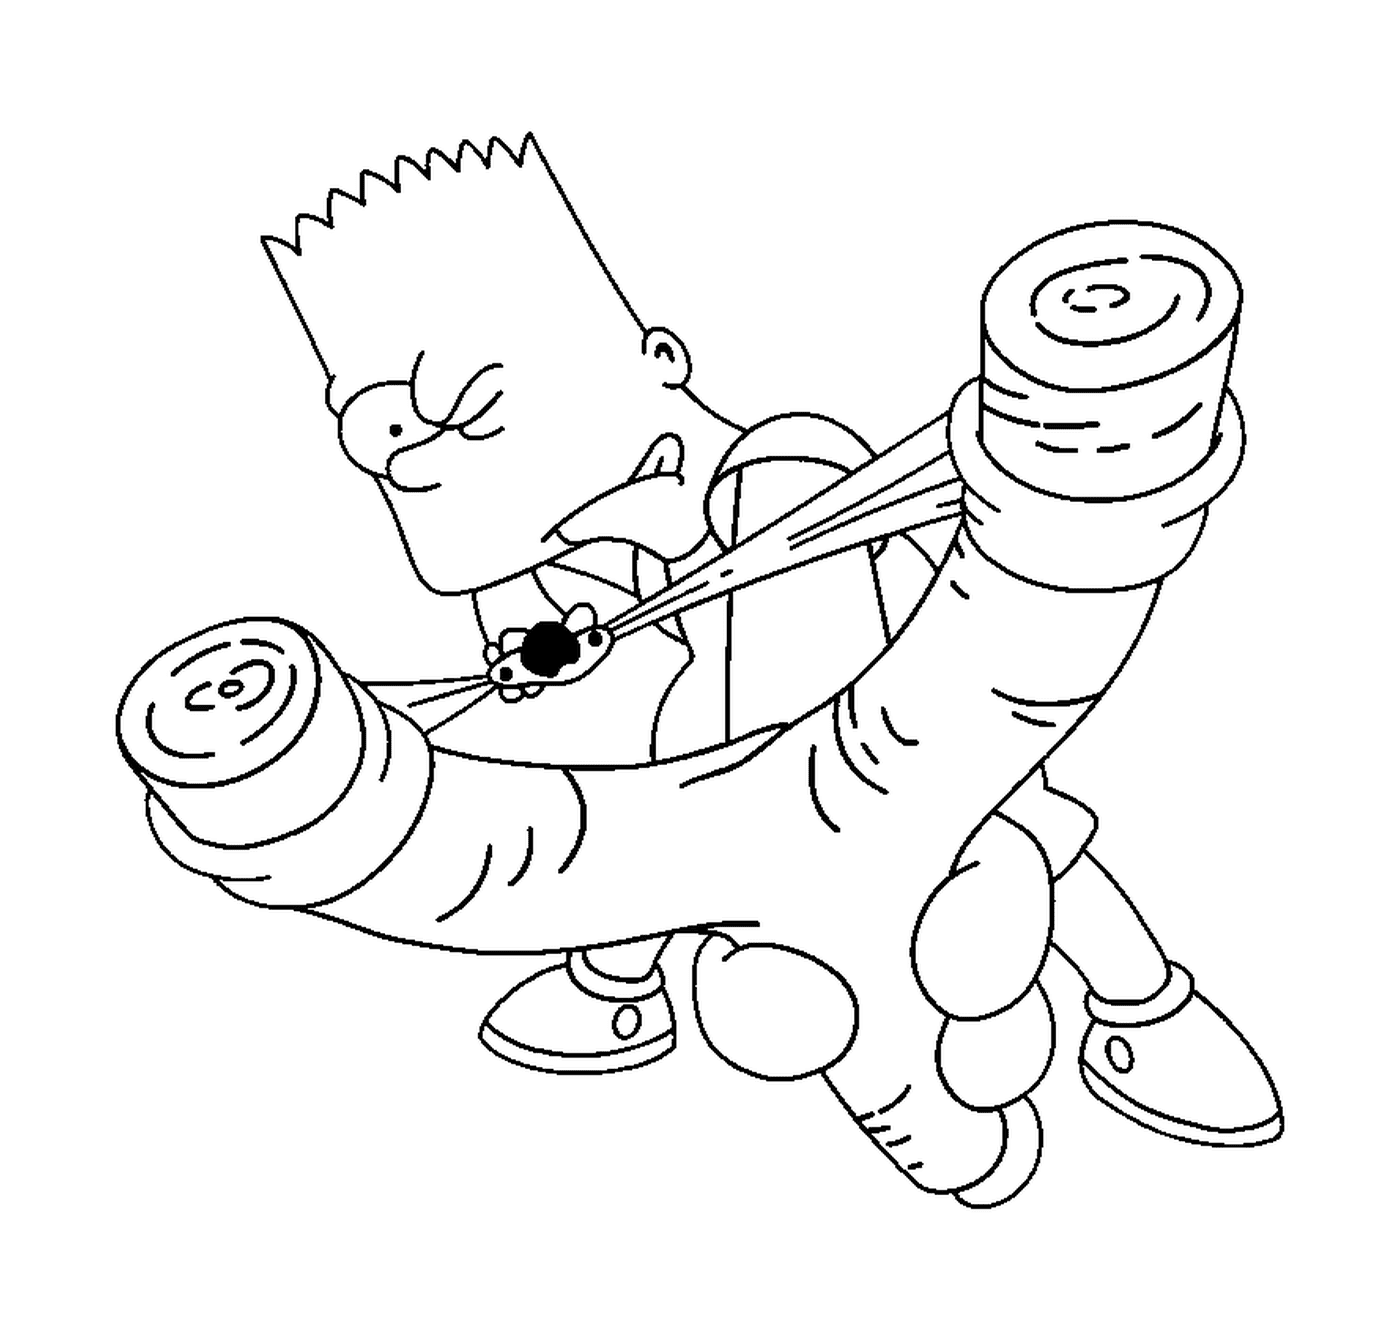  Bart with a stone thrower 